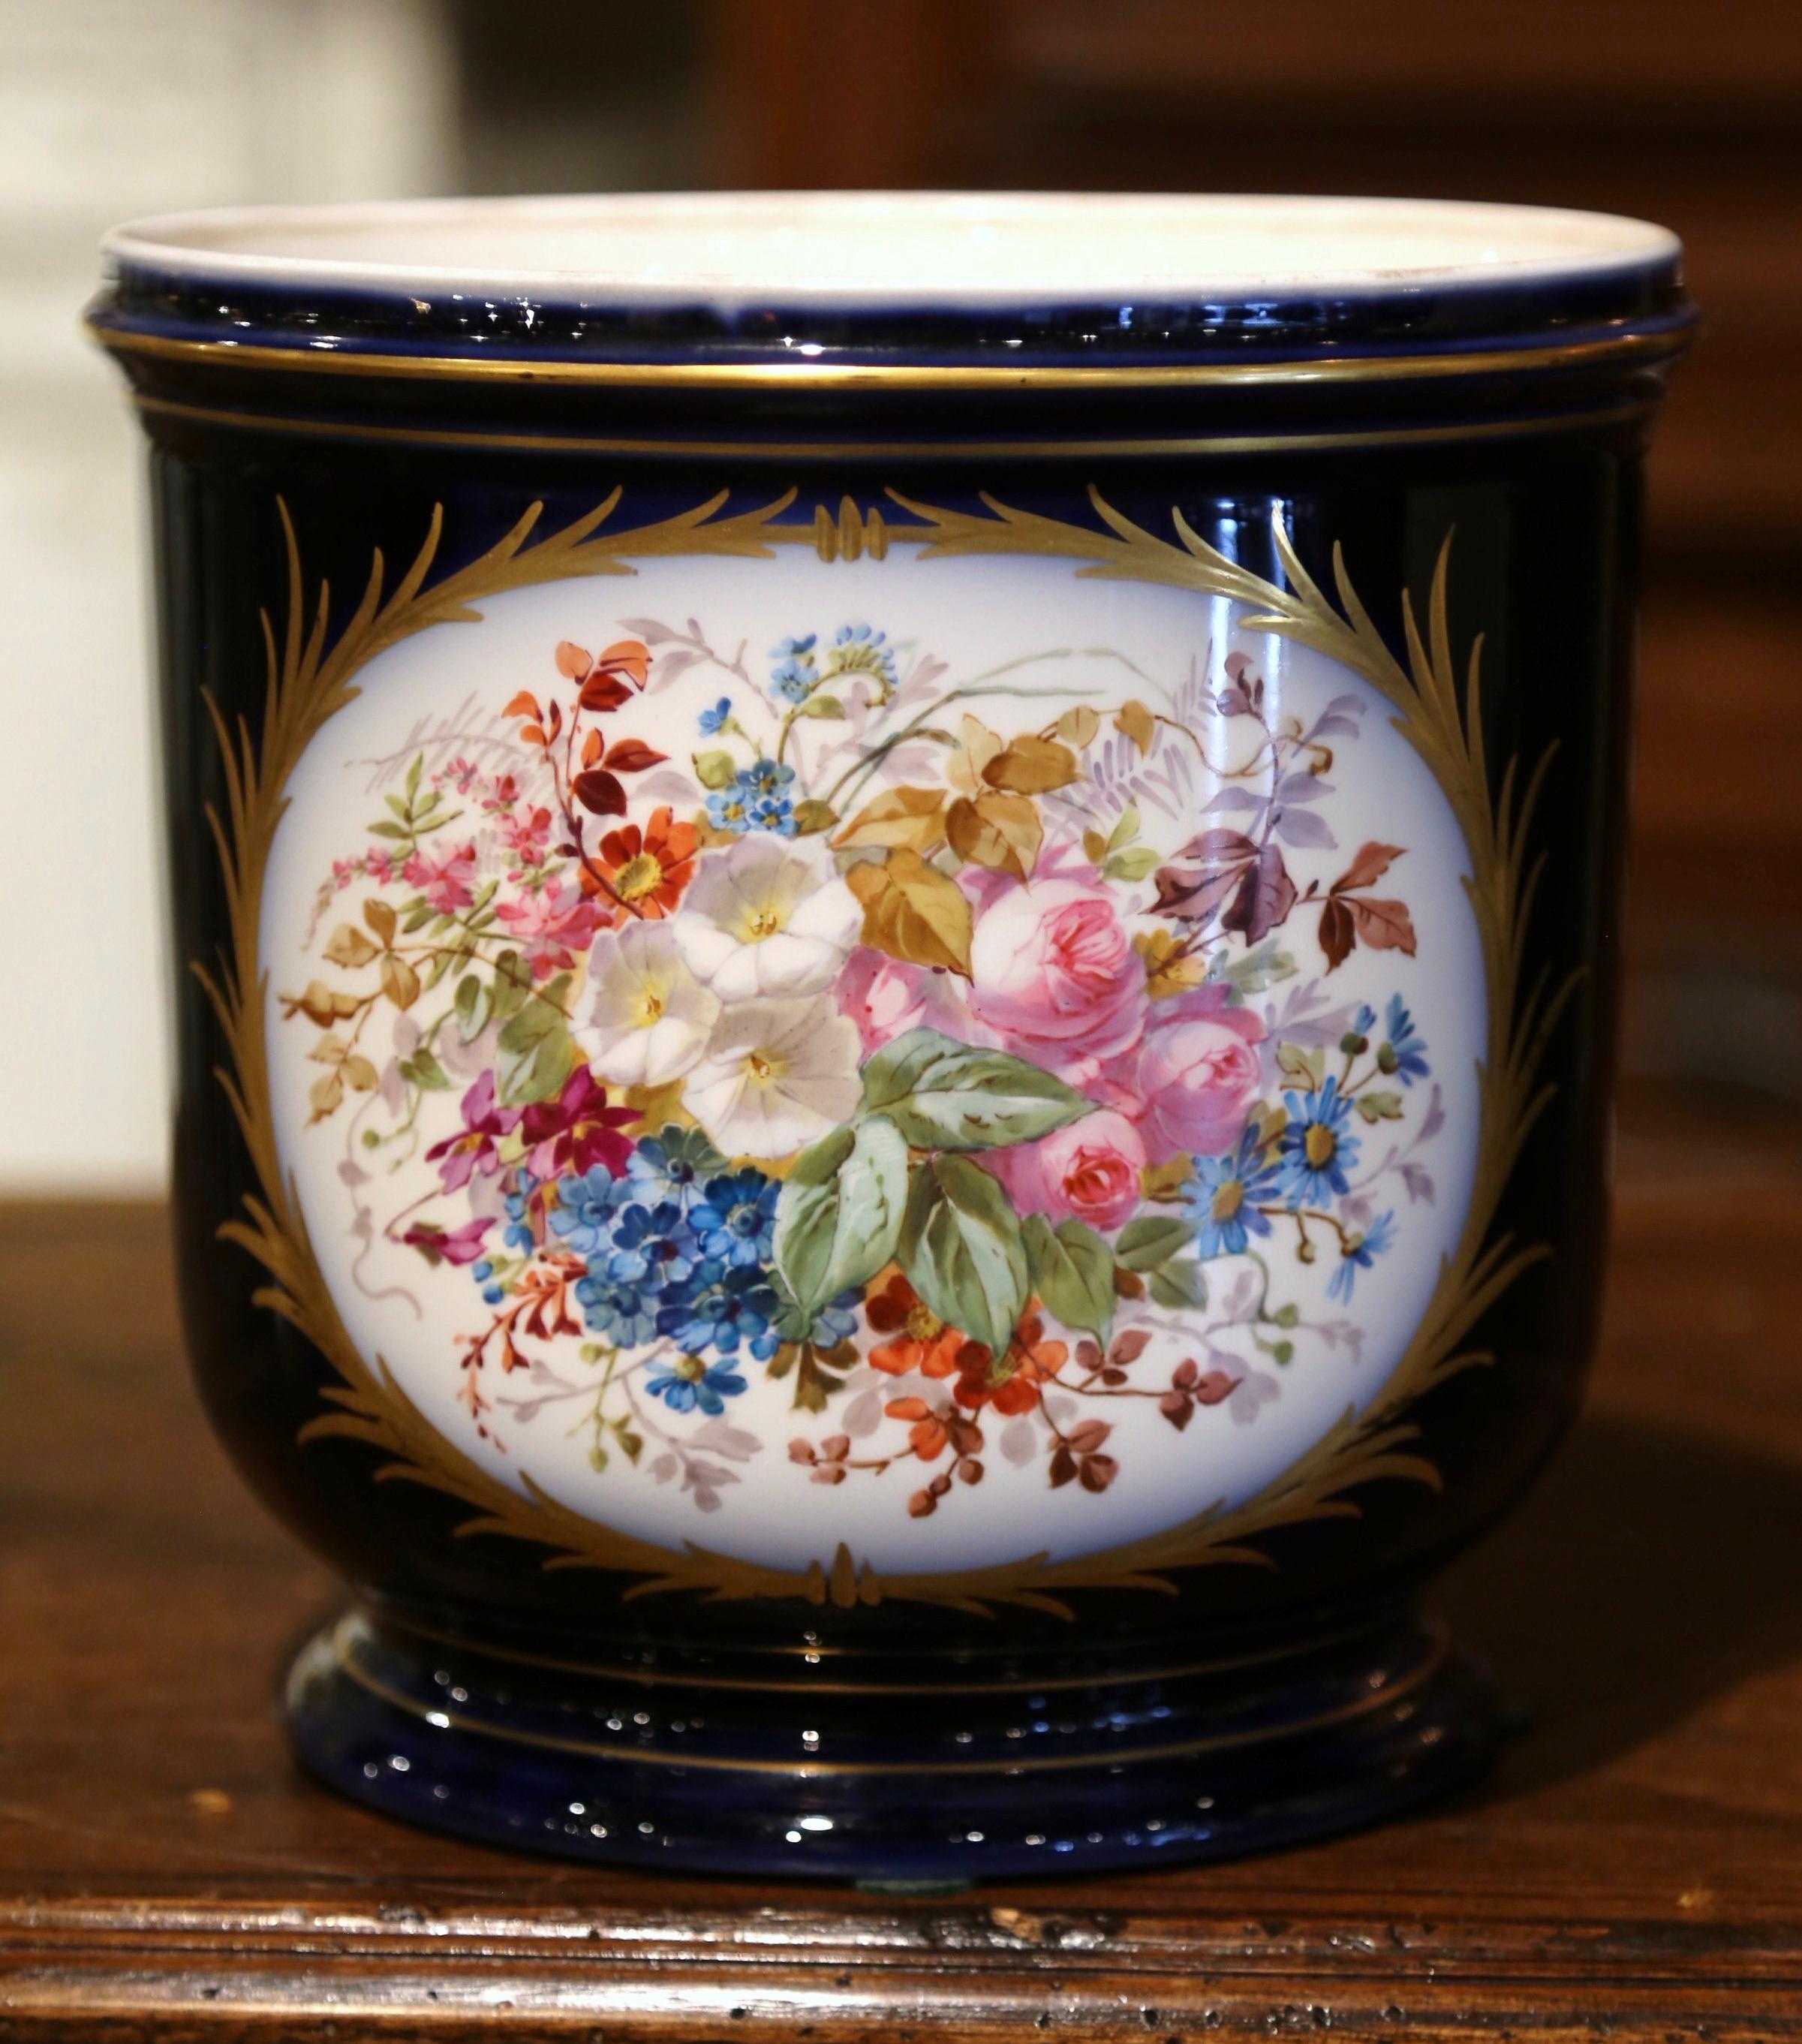 Decorate a table or a buffet with this elegant antique jardiniere. Crafted in Paris, France circa 1880, the porcelain cache pot is decorated with two medallions; one depicting a courting scene with two lovers, and the other with a large flower